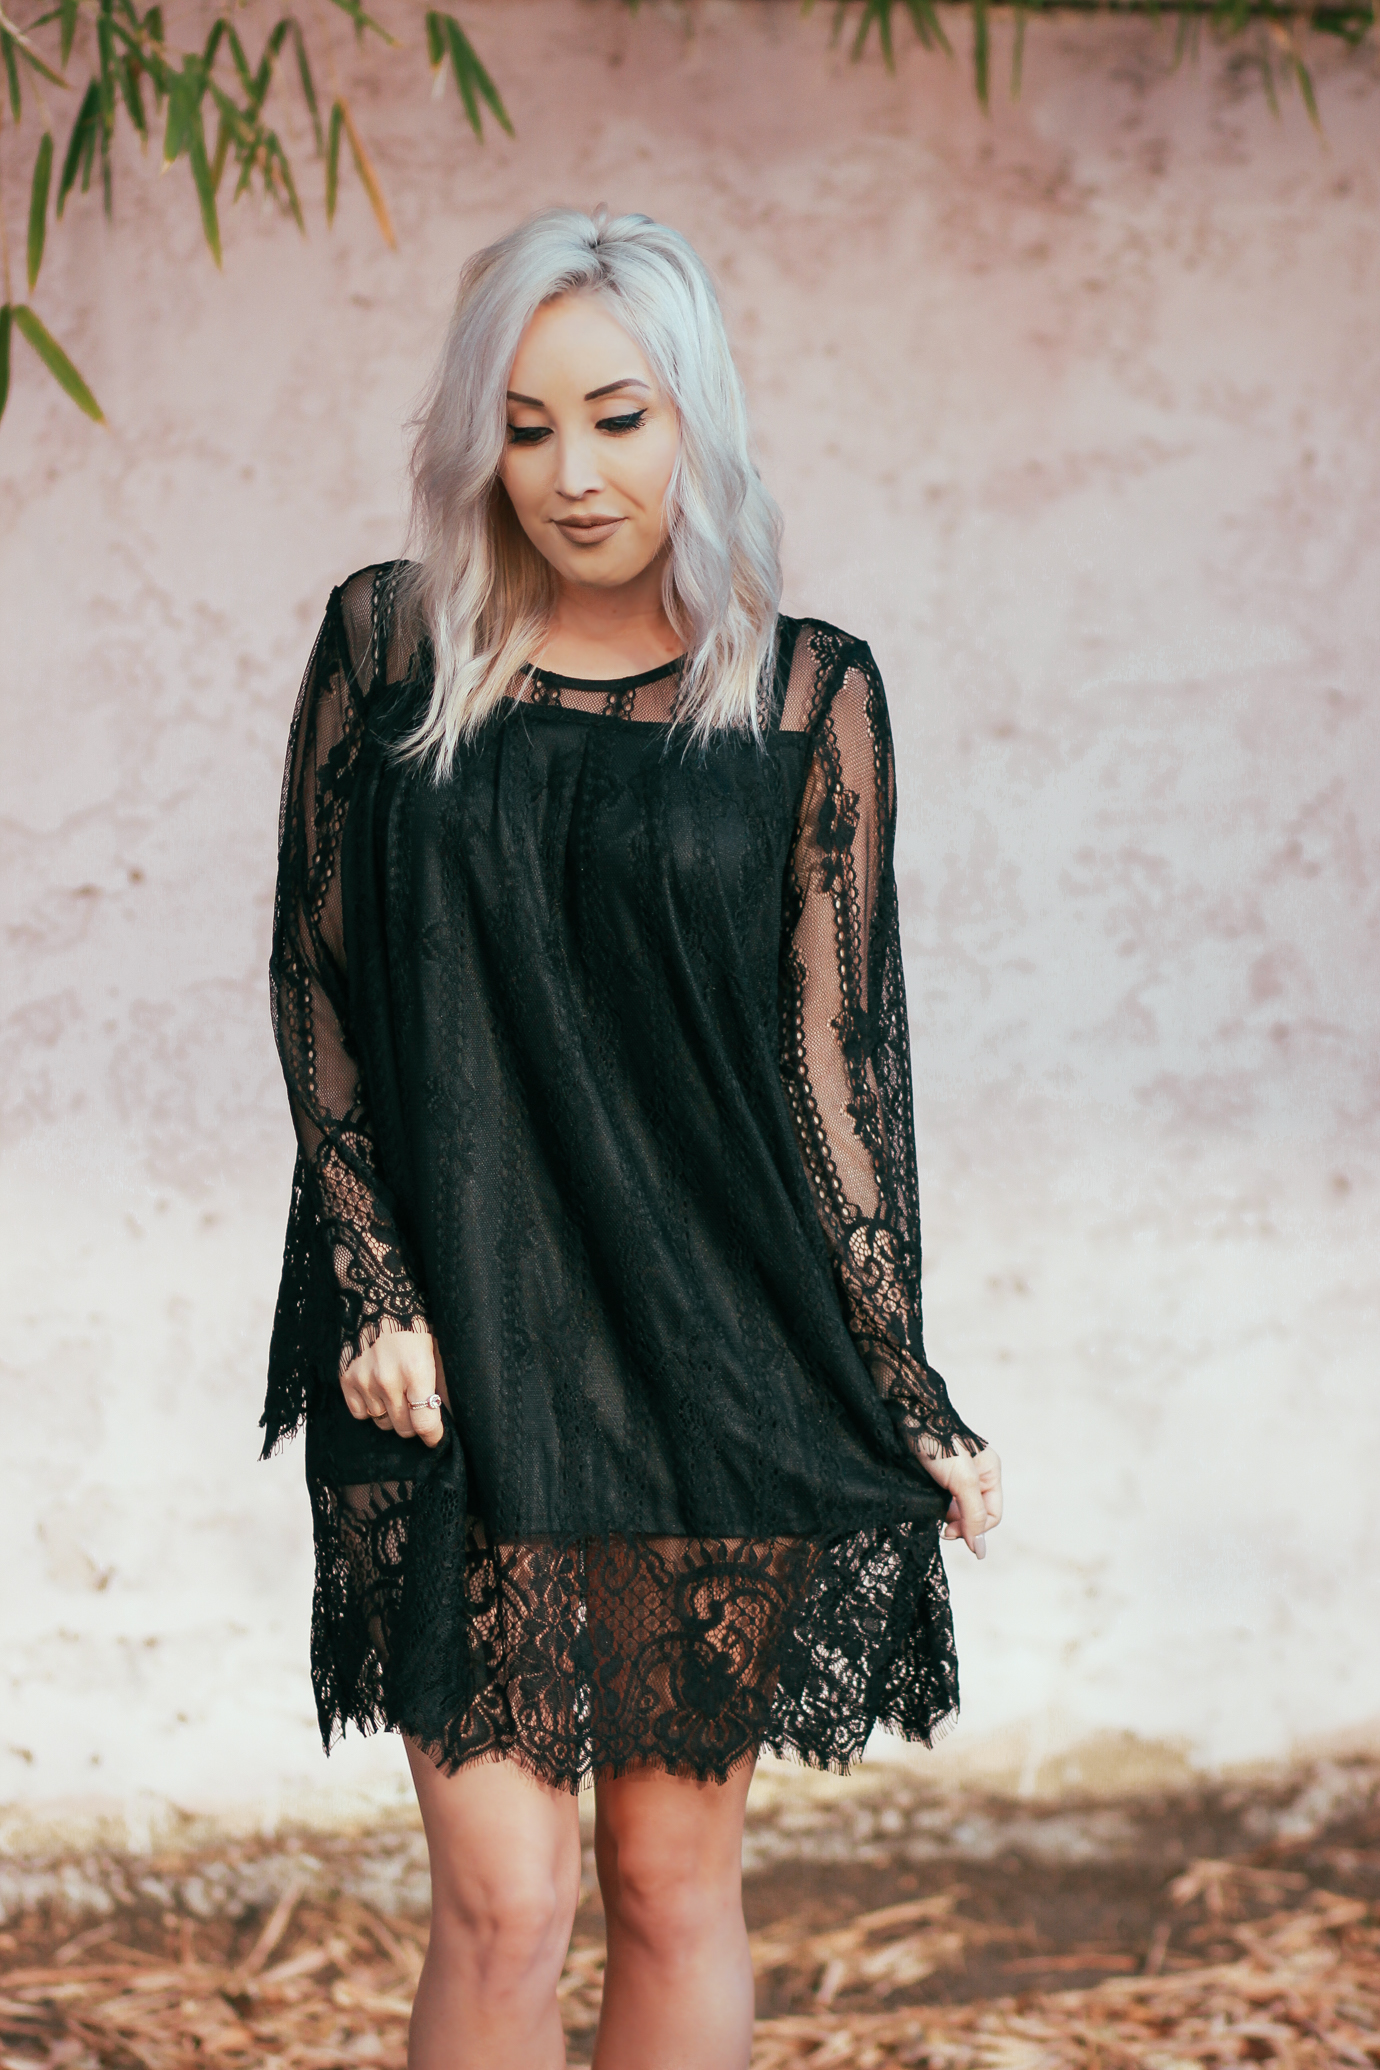 Blondie in the City | Black Lace Bell Sleeve Dress @Official_SheIn | Street Style #OOTD